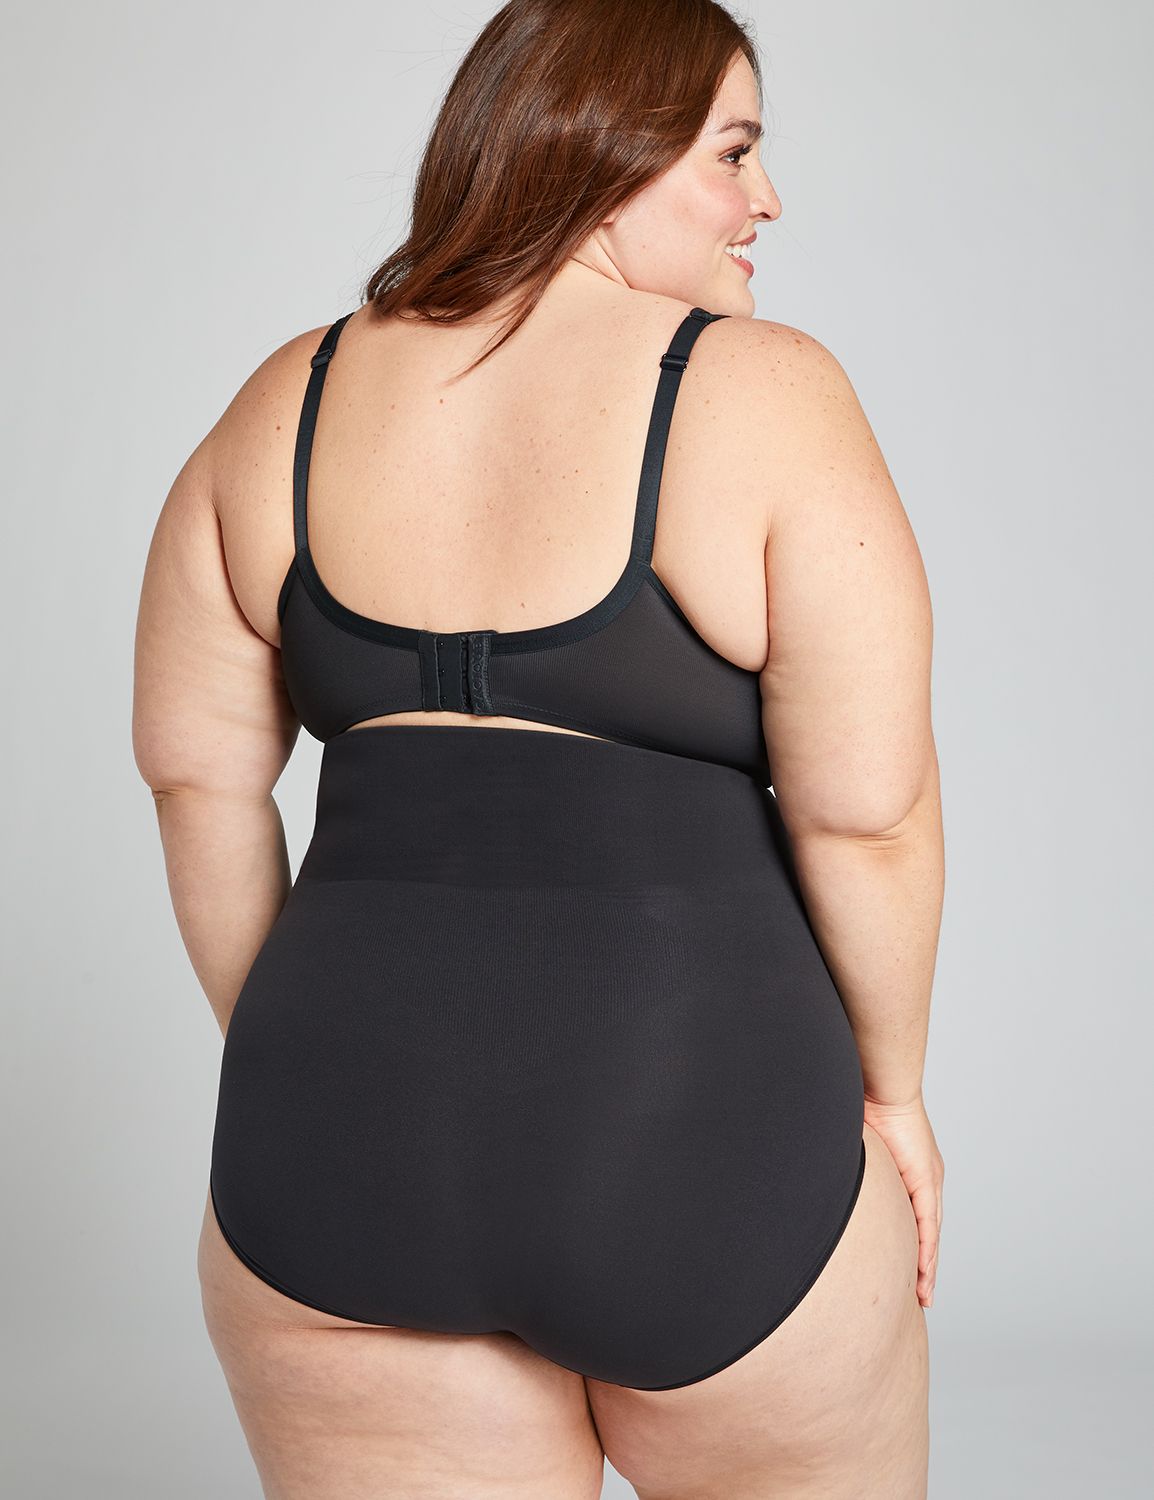 Spanx Higher Power High Waisted Power Panties - With REAL Photos! 